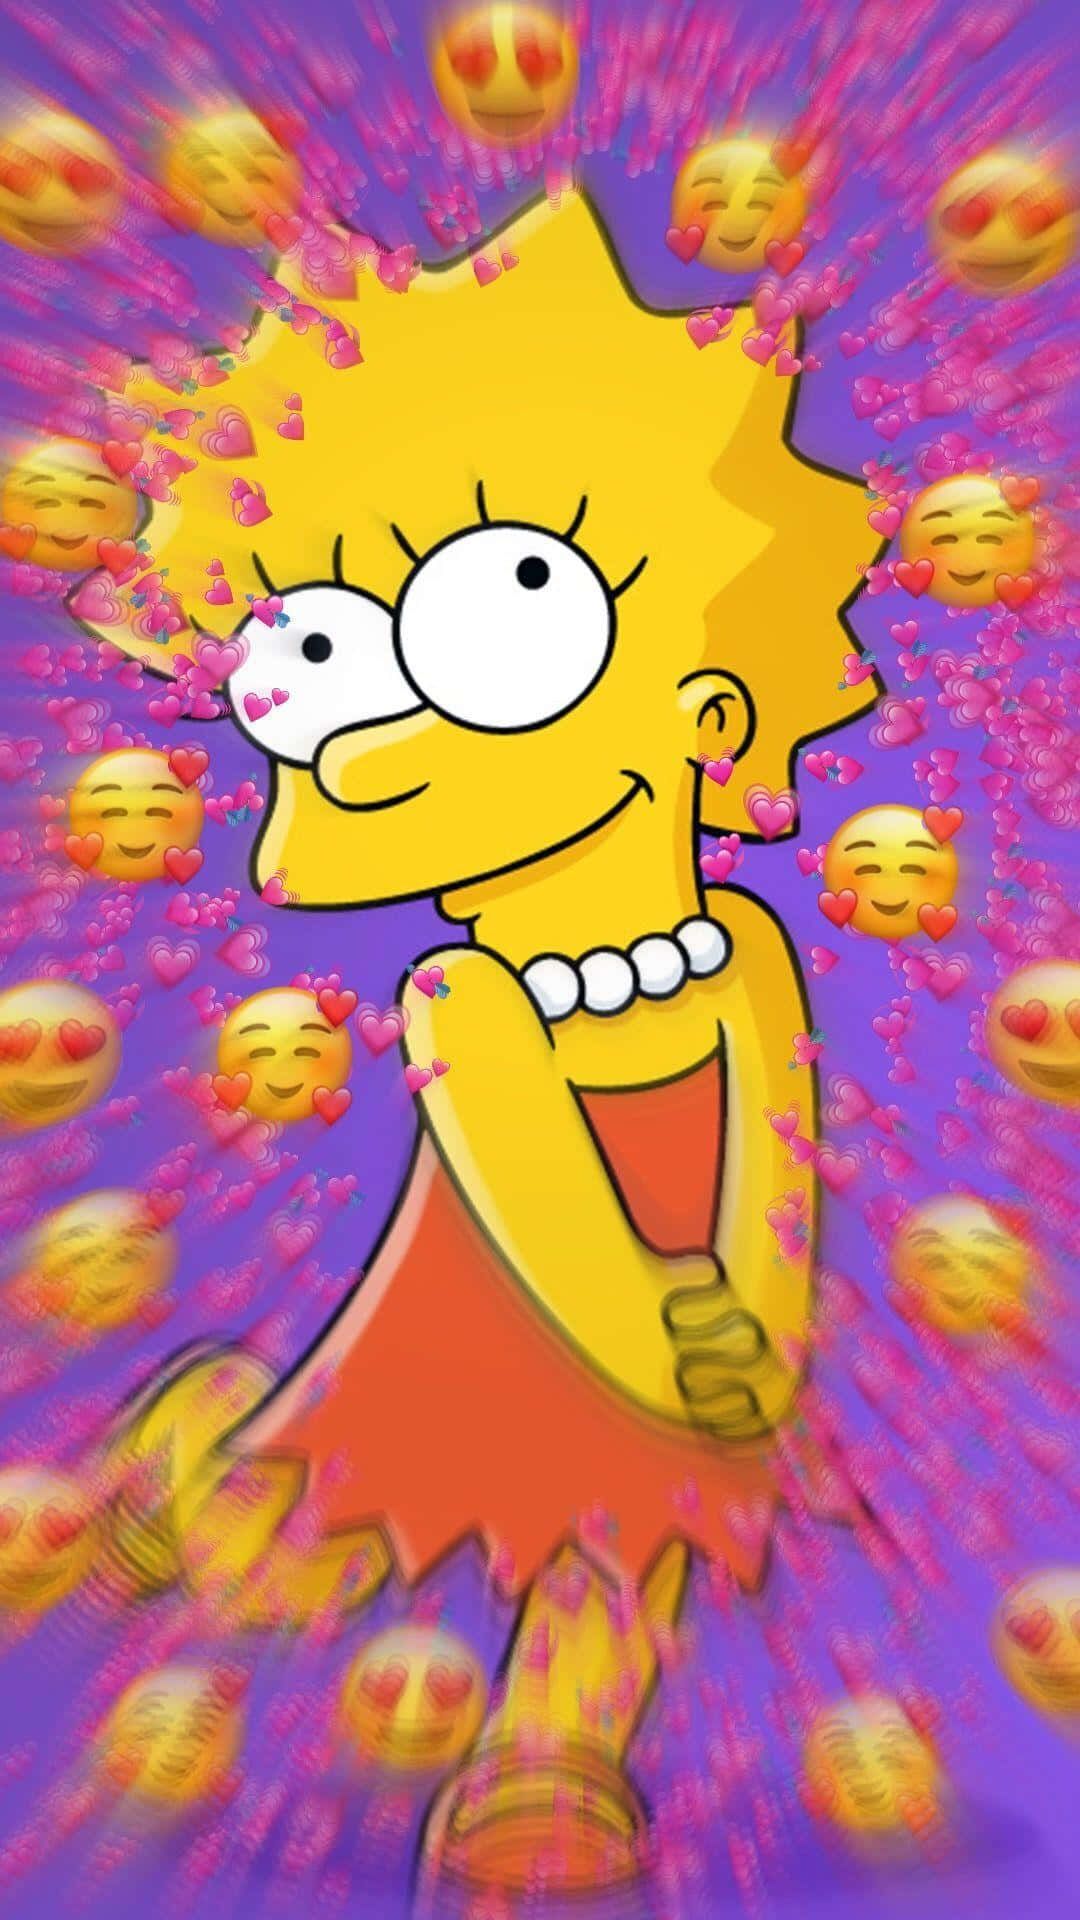 Lisa Simpson iPhone Wallpaper with high-resolution 1080x1920 pixel. You can use this wallpaper for your iPhone 5, 6, 7, 8, X, XS, XR backgrounds, Mobile Screensaver, or iPad Lock Screen - Lisa Simpson, The Simpsons, TikTok